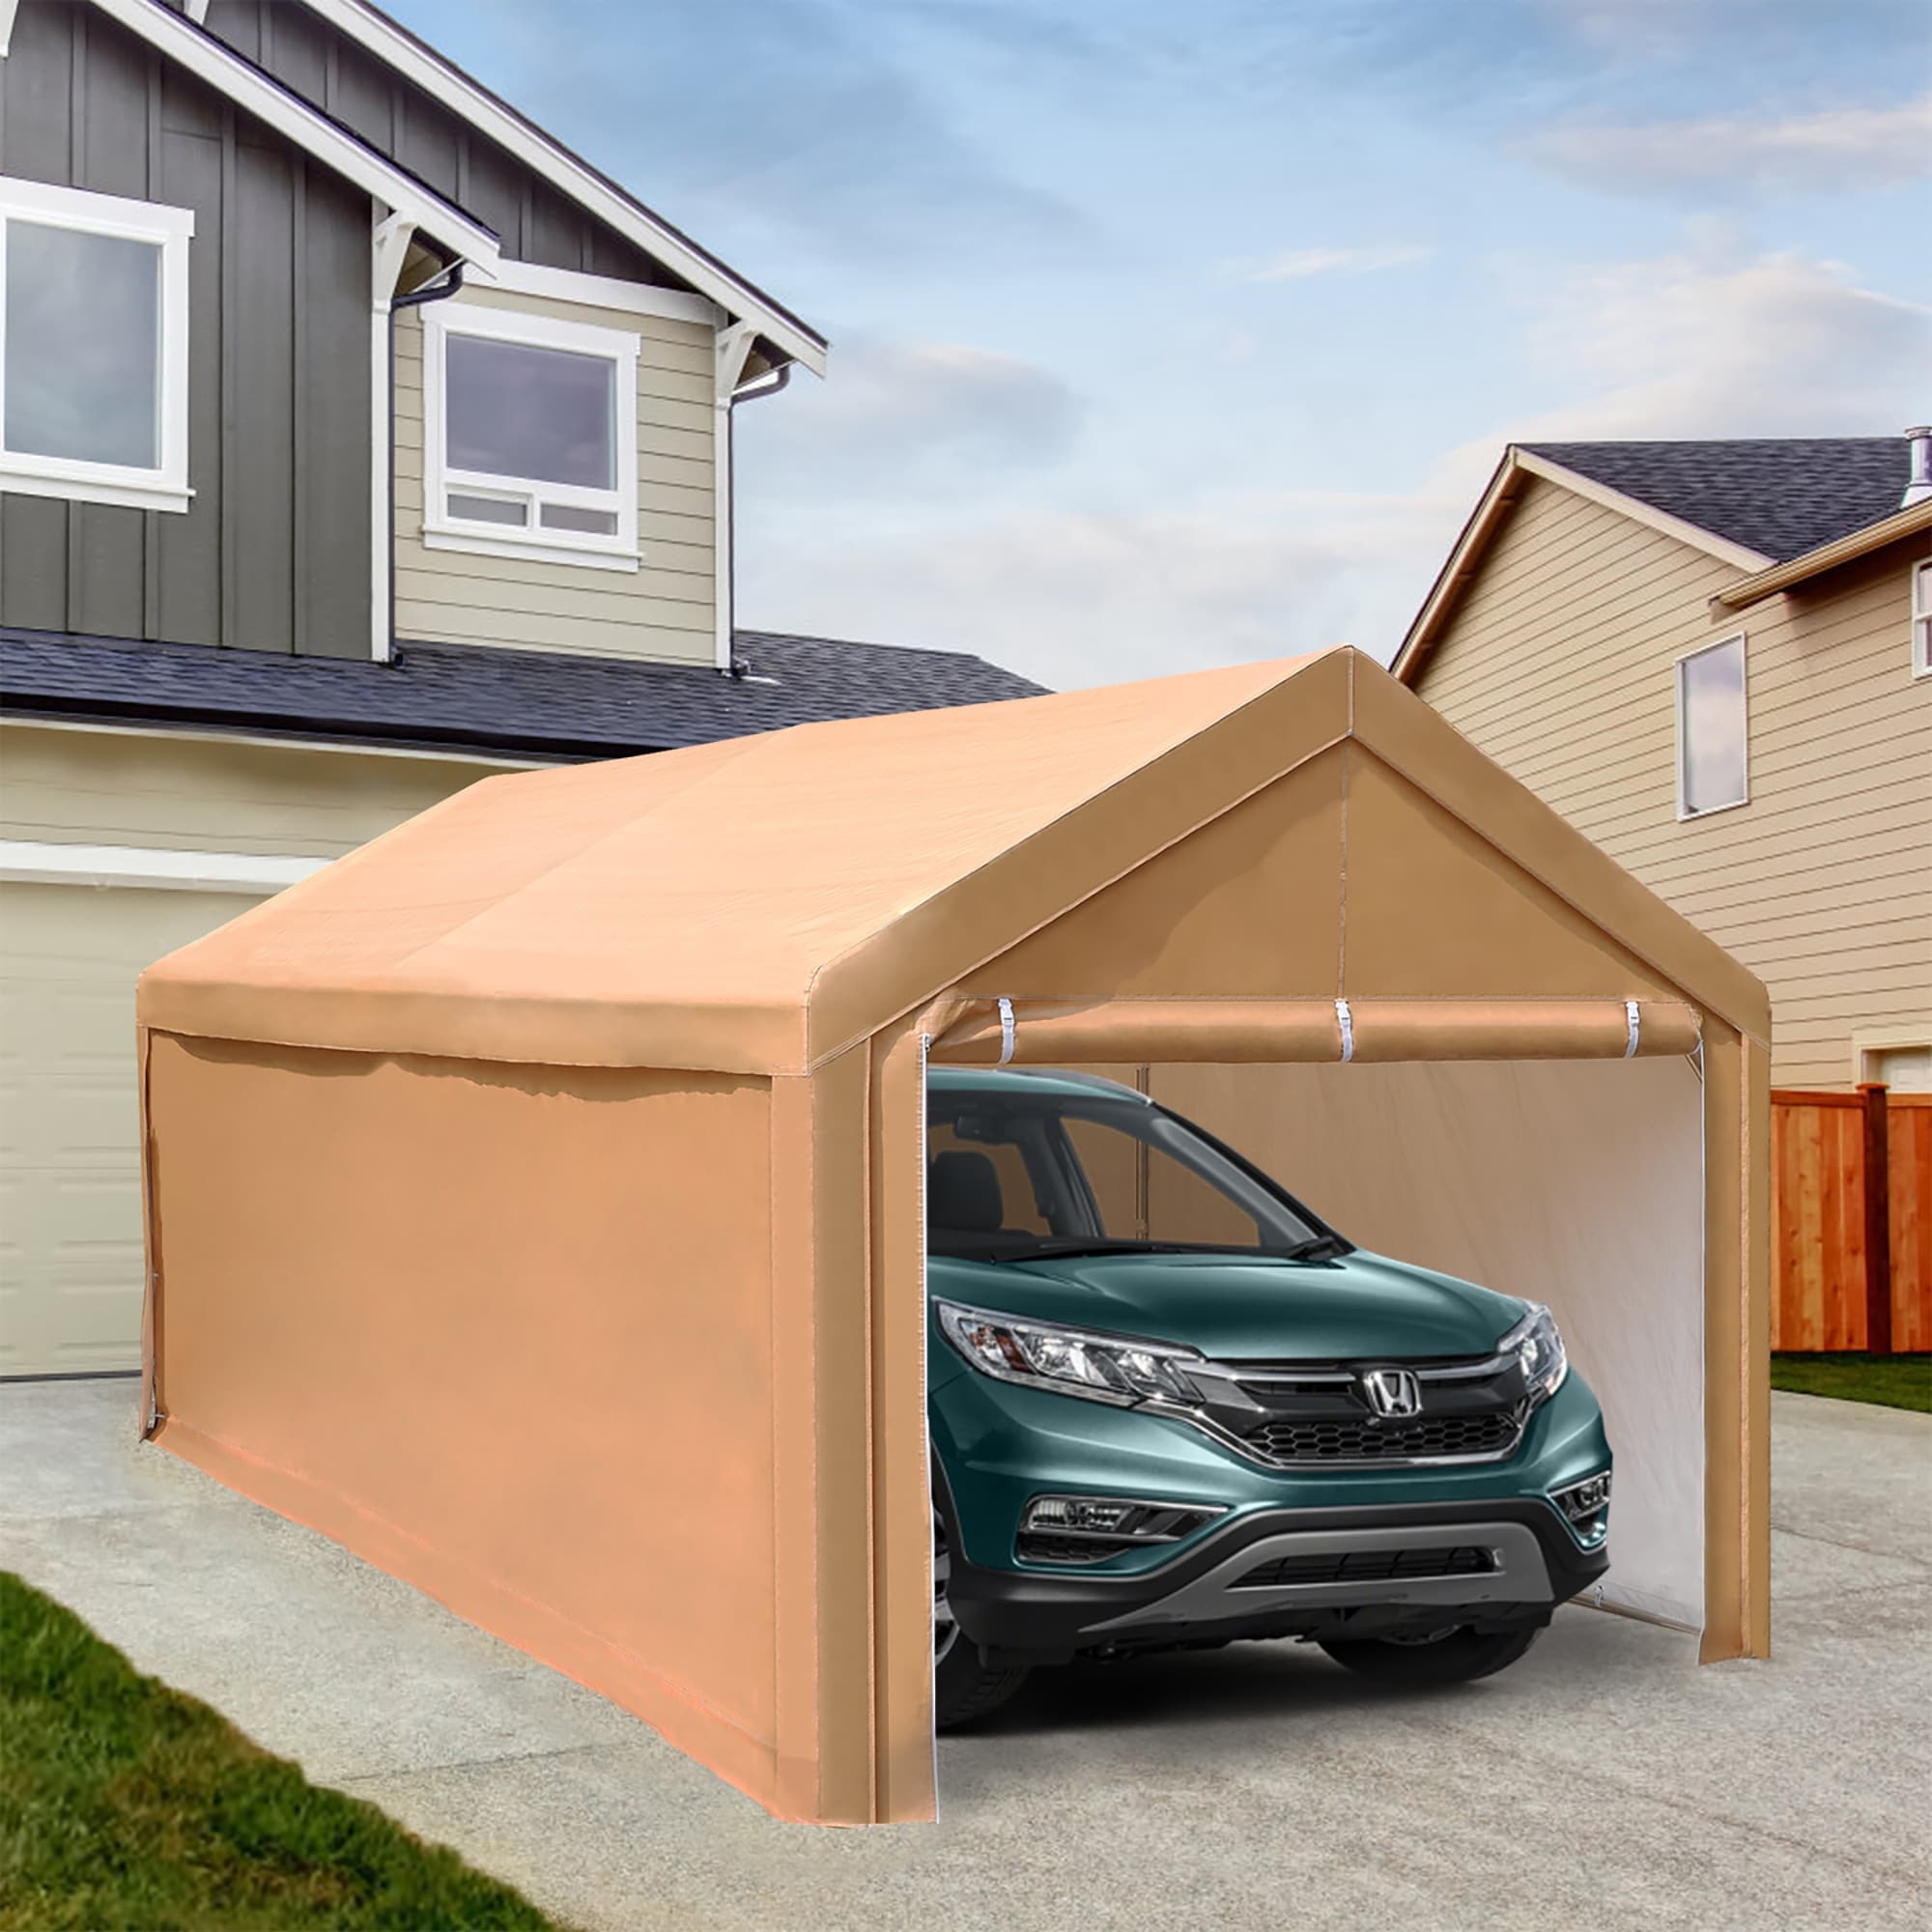 GREEN PARTY 10x20 ft Heavy Duty Carport Car Canopy Party Tent with  Removable Sidewalls & Doors, Car Canopy Garage Party Tent Boat Shelter with